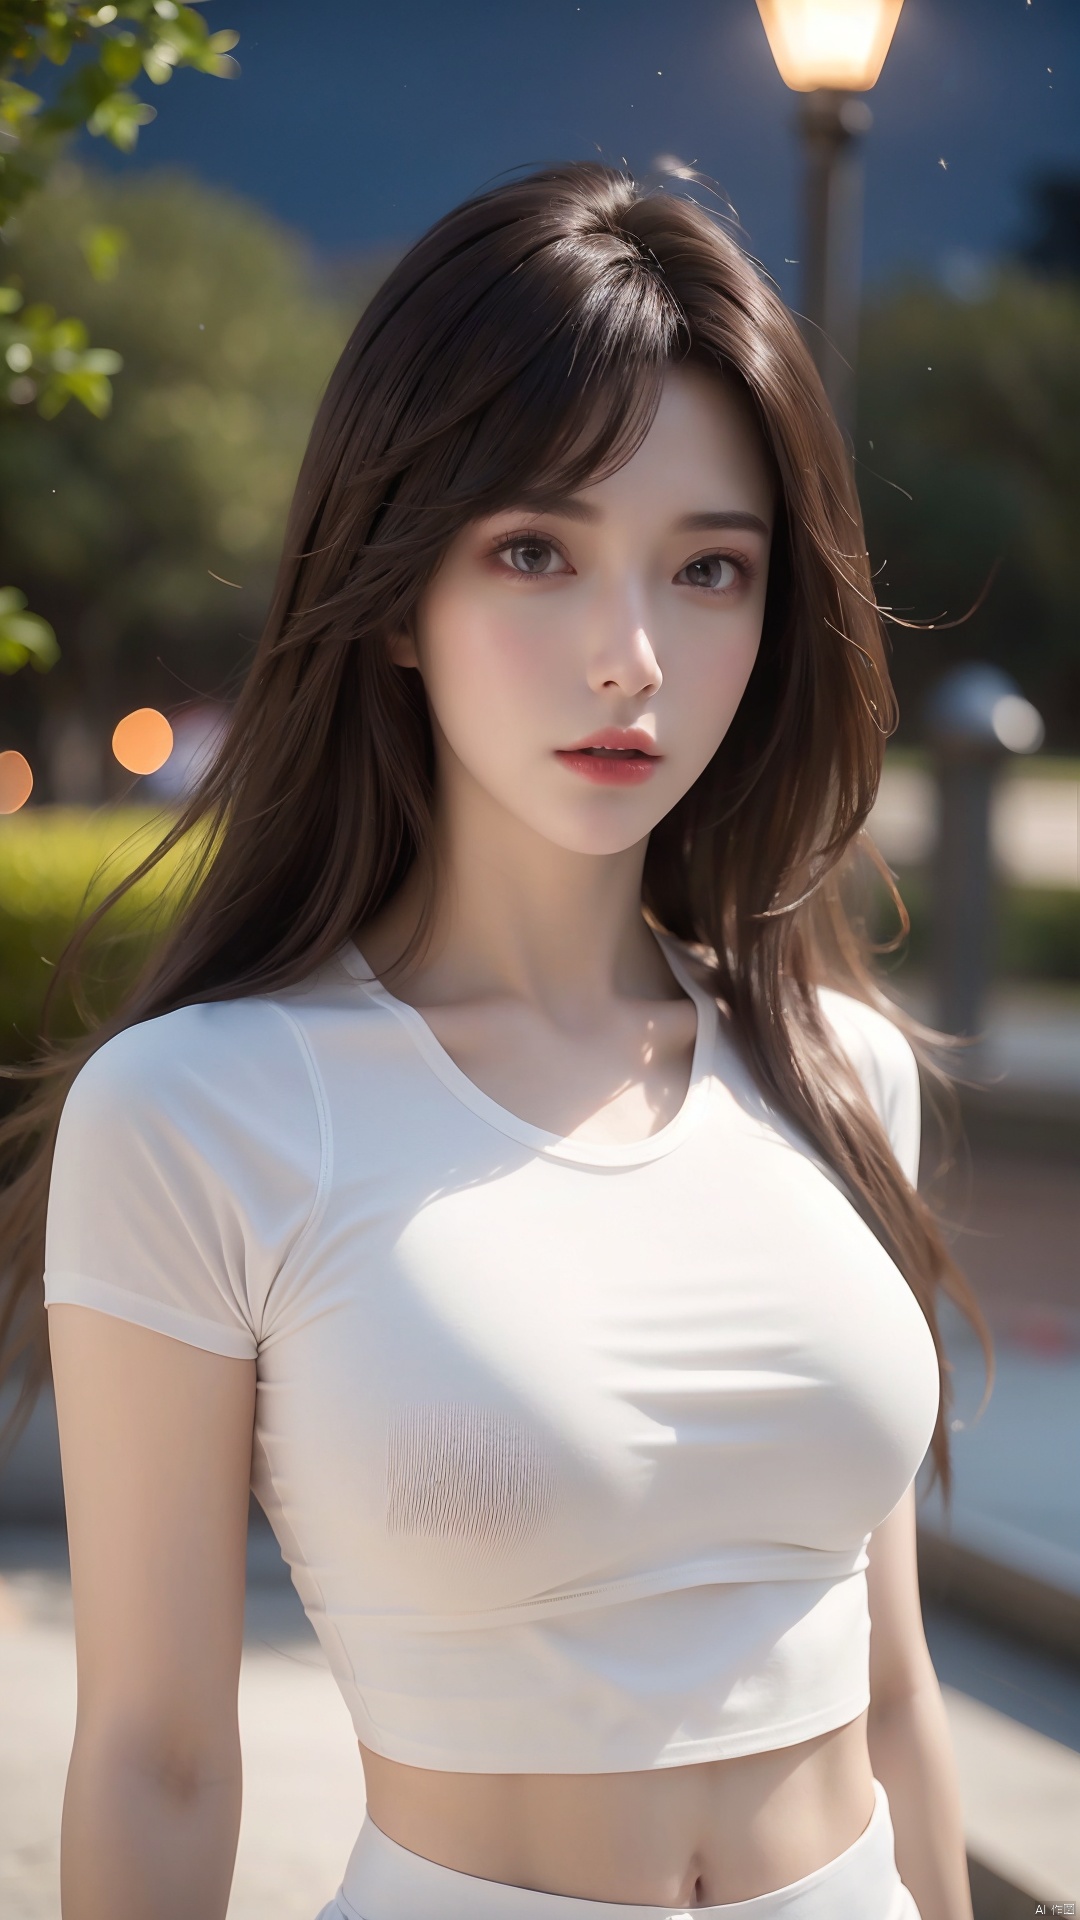  ((Realistic lighting, Best quality, 8K, Masterpiece: 1.3)), Clear focus: 1.2, 1girl, Perfect beauty: 1.4, Slim abs: 1.1, ((Dark brown hair)), (White crop top: 1.4), (Outdoor, Night: 1.1), Park view, Super fine face, Fine eyes, Double eyelids,